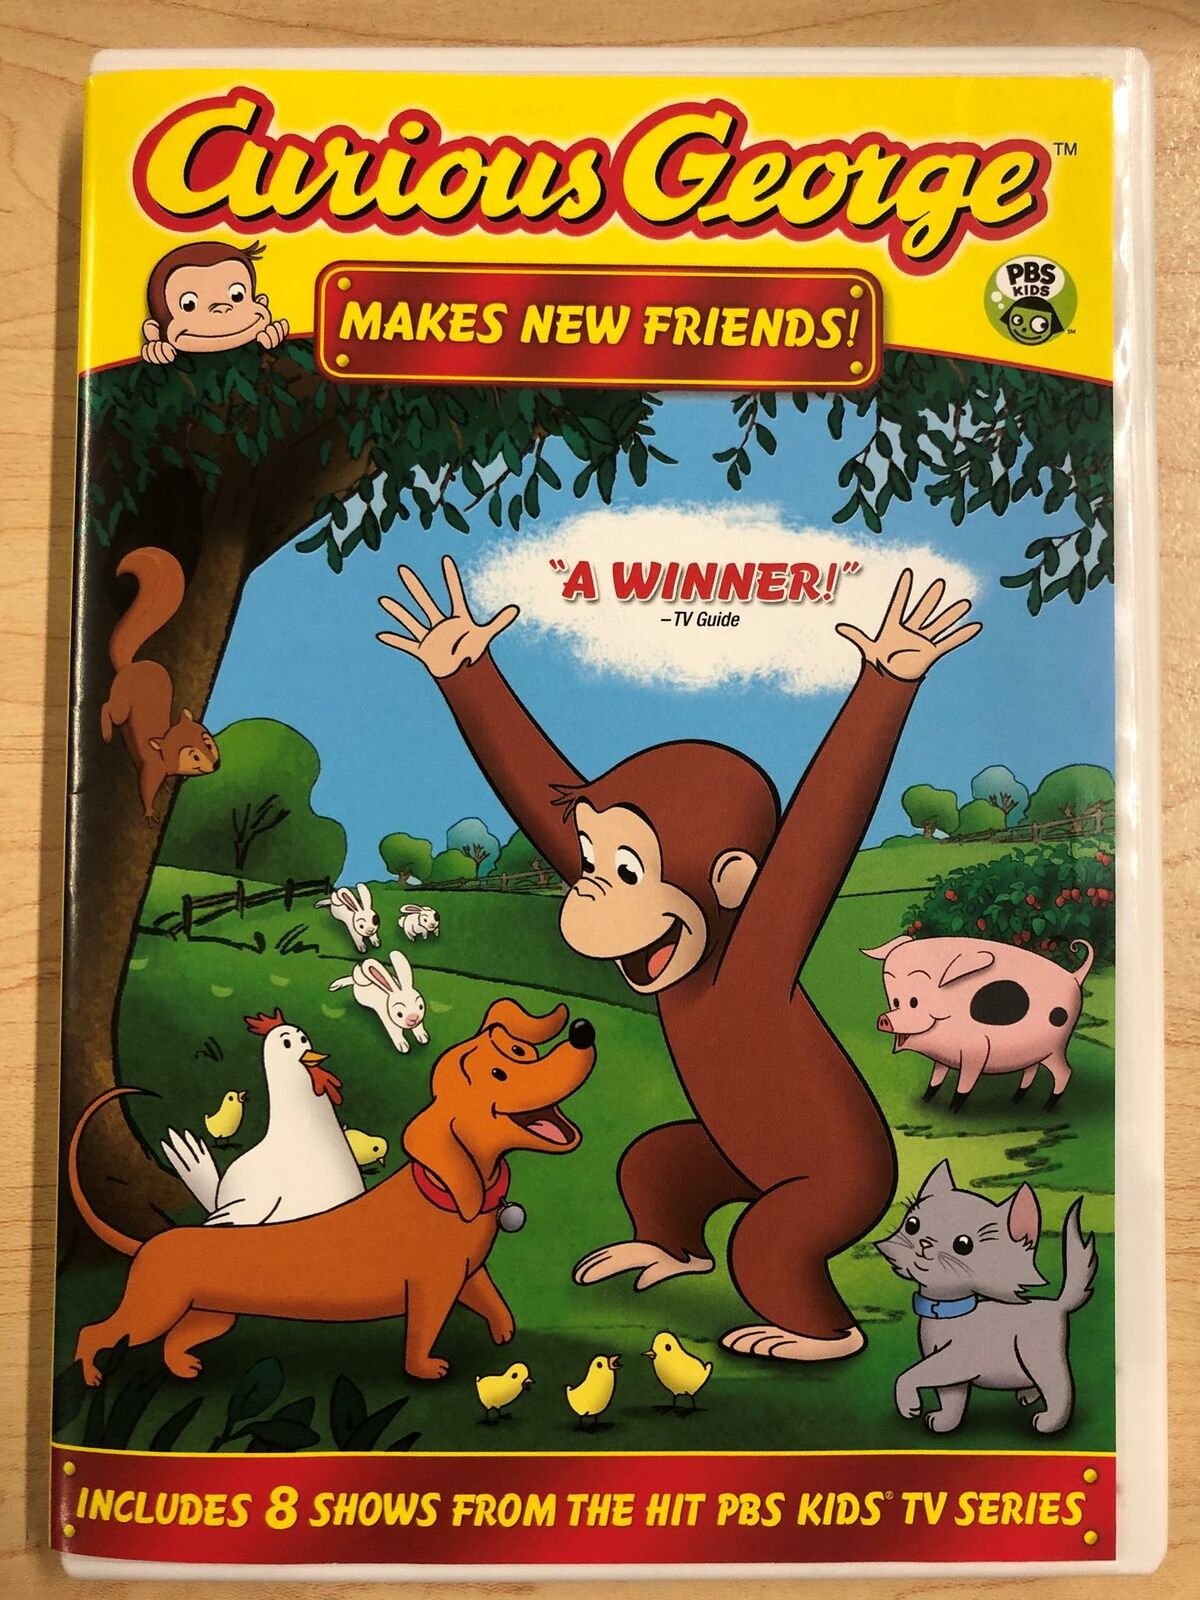 Curious George - Makes New Friends (DVD, 8 shows) - G1004